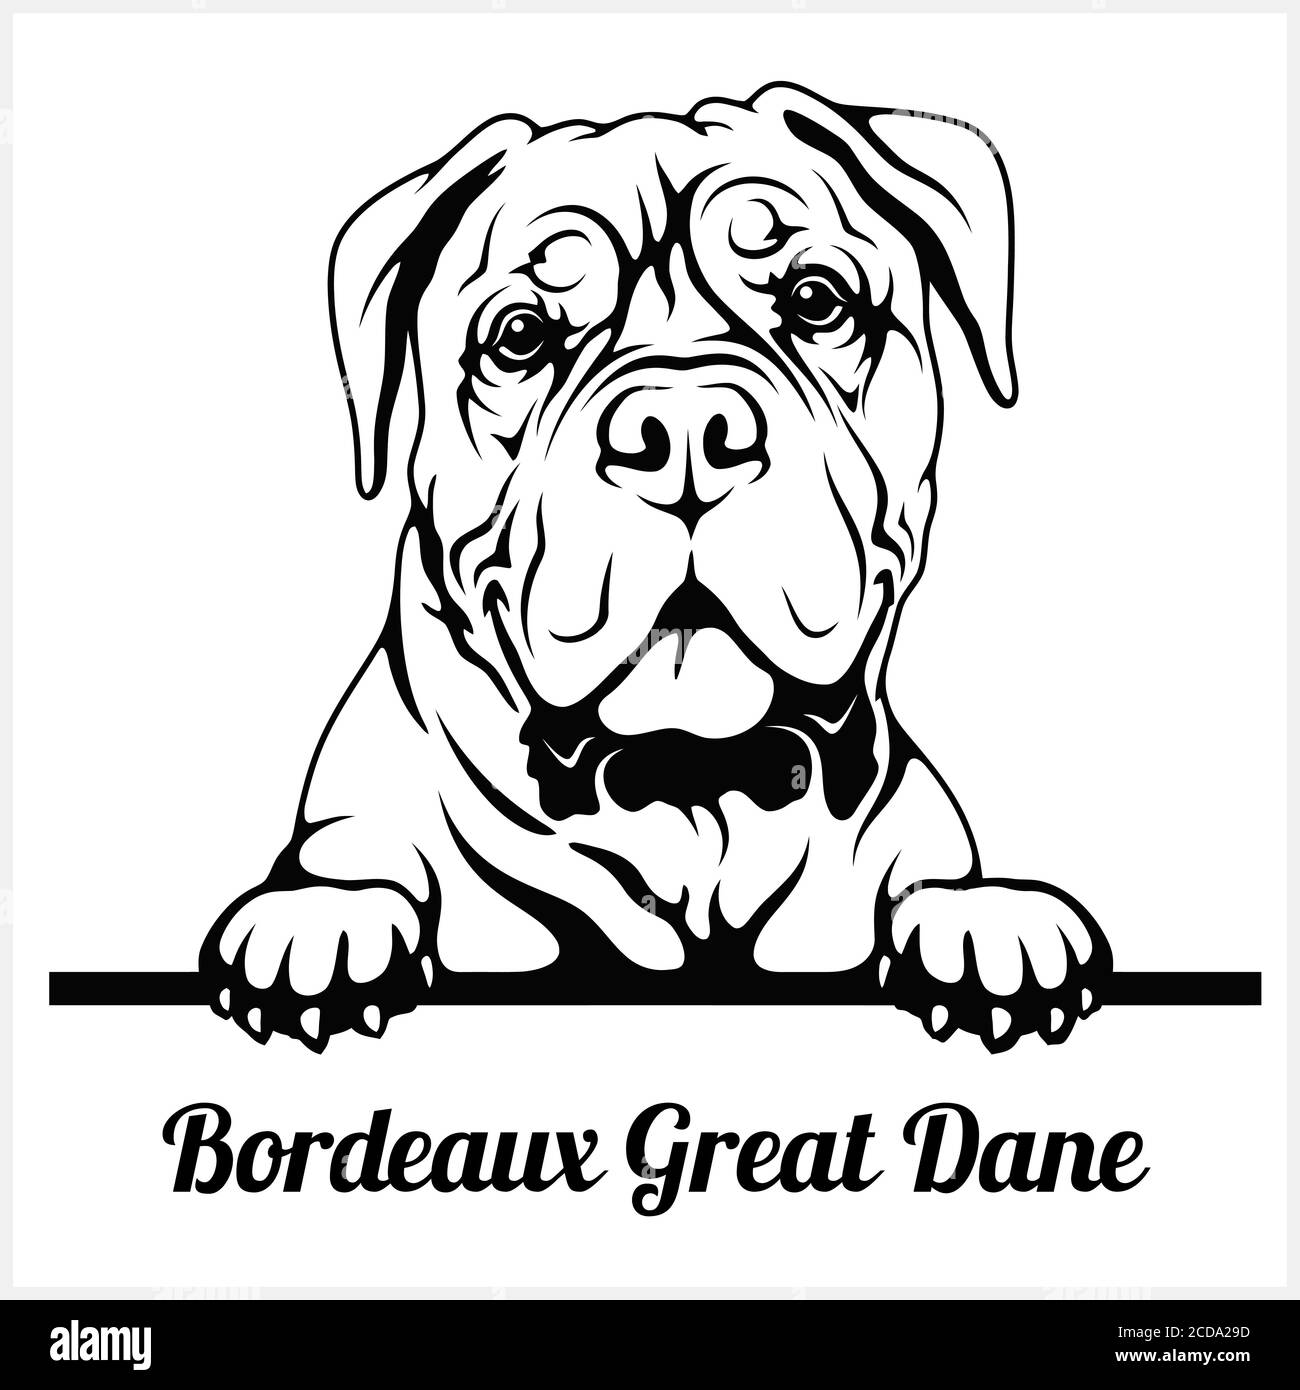 Bordeaux Great Dane - Peeking Dogs - breed face head isolated on white Stock Vector